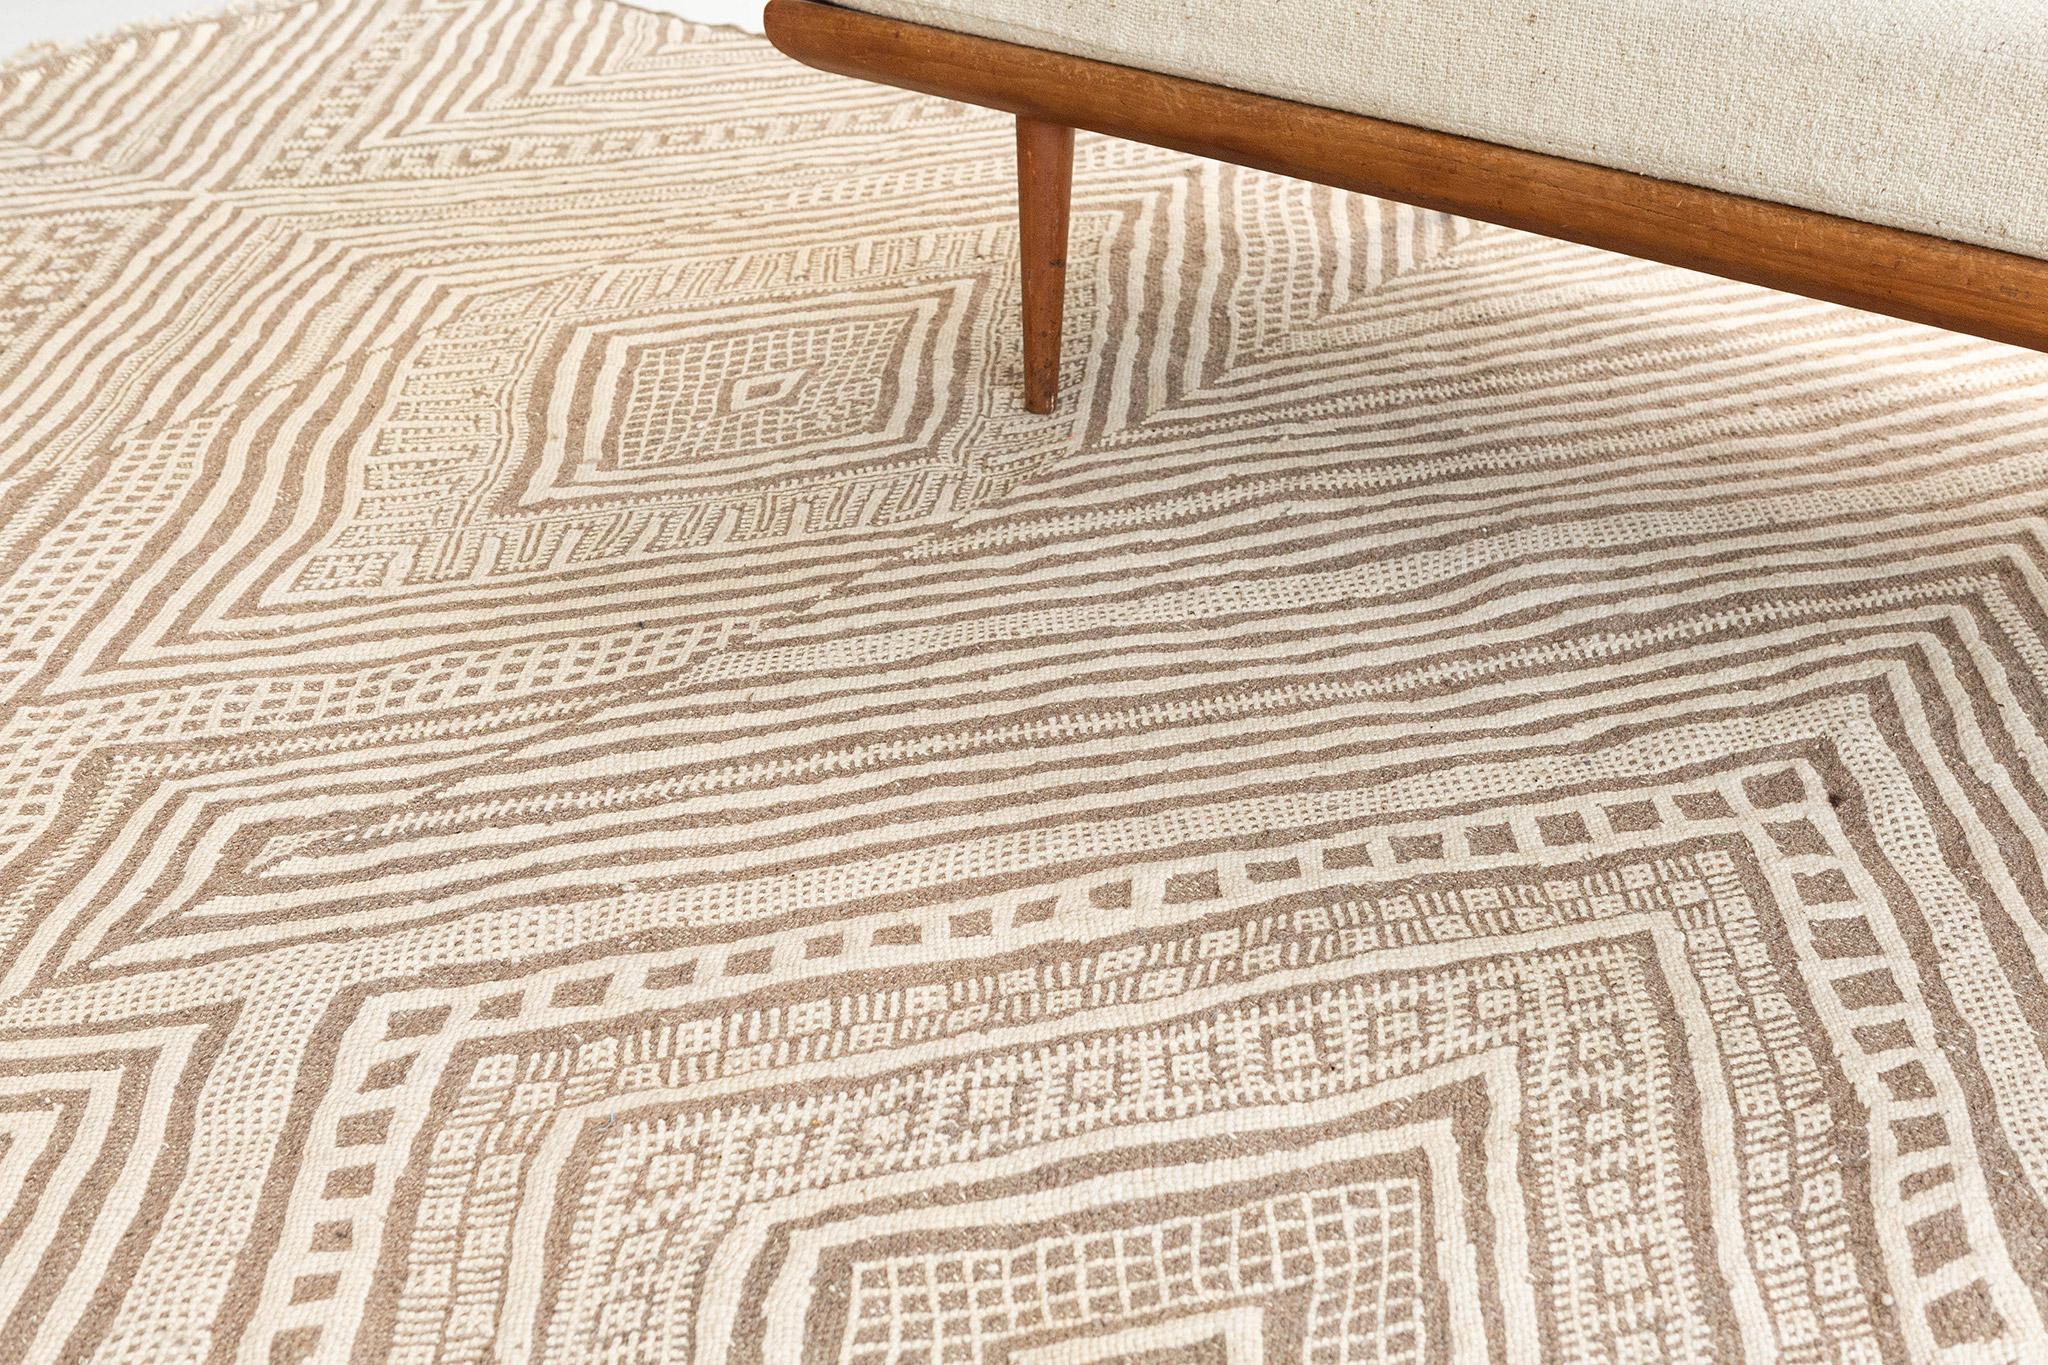 Featuring a charming illusion effect, this Moroccan Kilim rug adds texture and subtle graphic appeal forming a warm, relaxed space. The abrashed field is covered in an all-over diamond effect reminiscent of a kaleidoscope across the tantalizing and